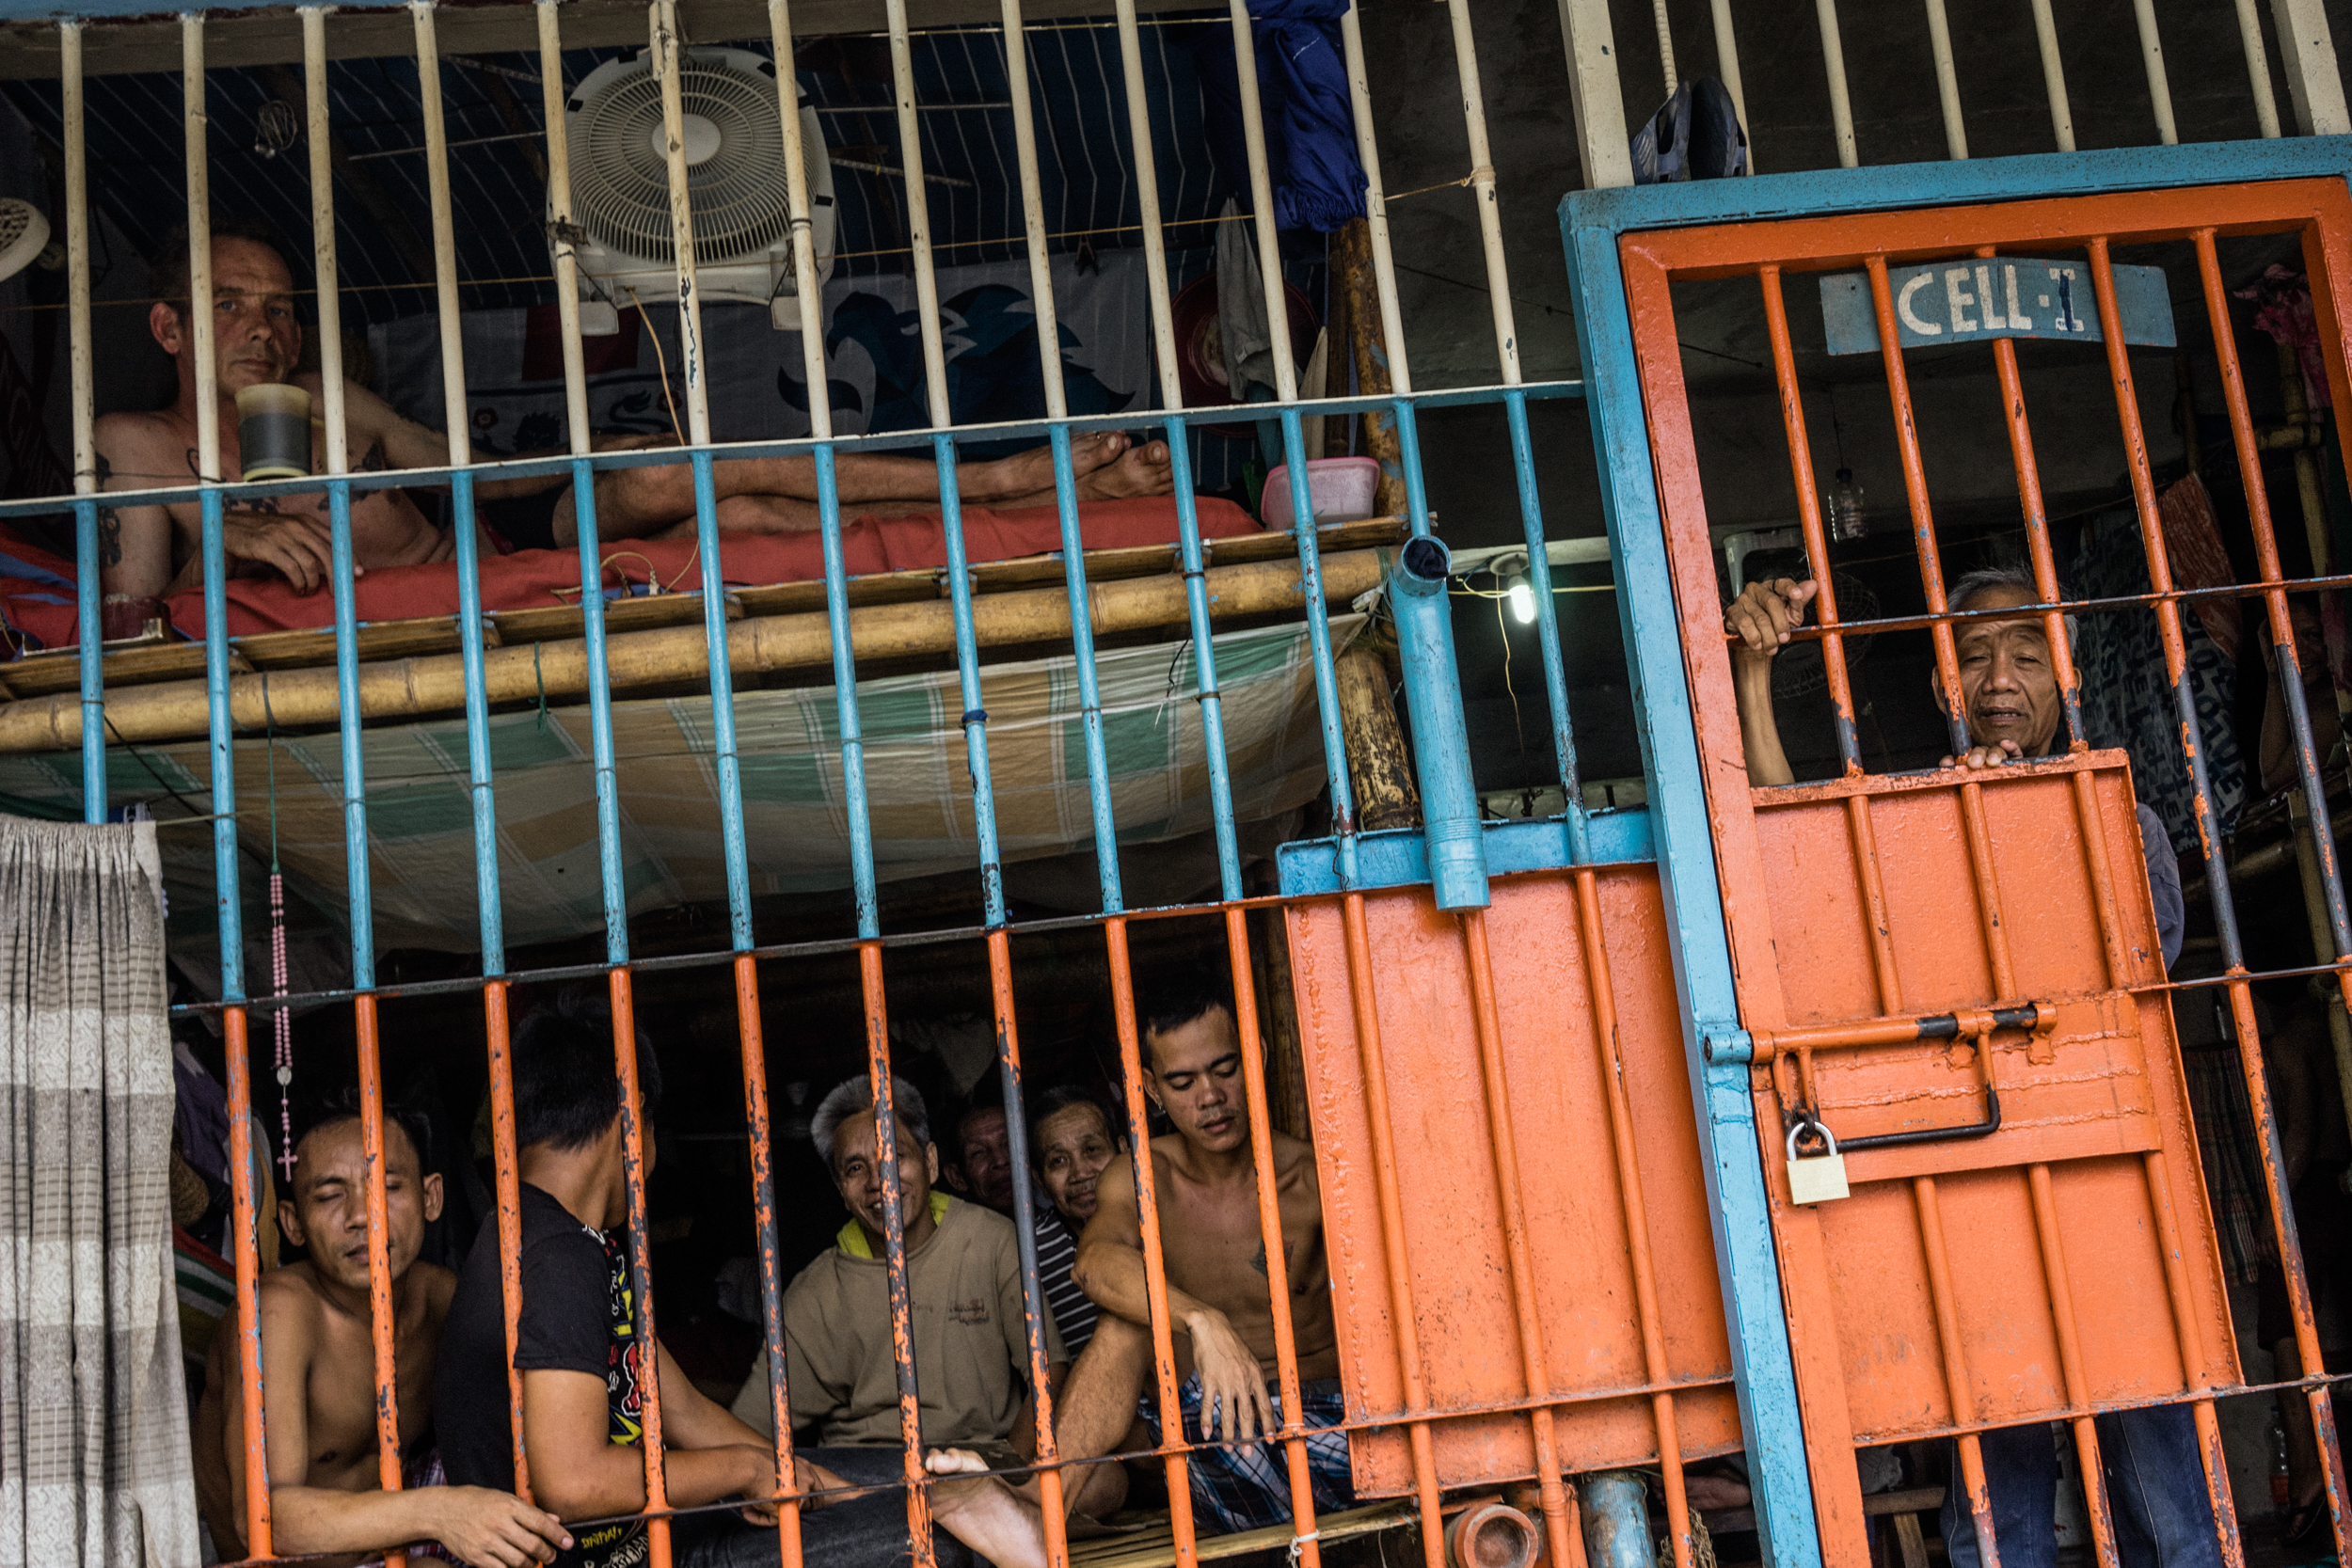  Kalibo, Philippines - September 20, 2015: Inmates at the local jail, where Celia Robelo, a Filipina woman, is being held for human trafficking and illegal recruitment charges following the death of a Filipino seafarer. Robelo claims that she did not